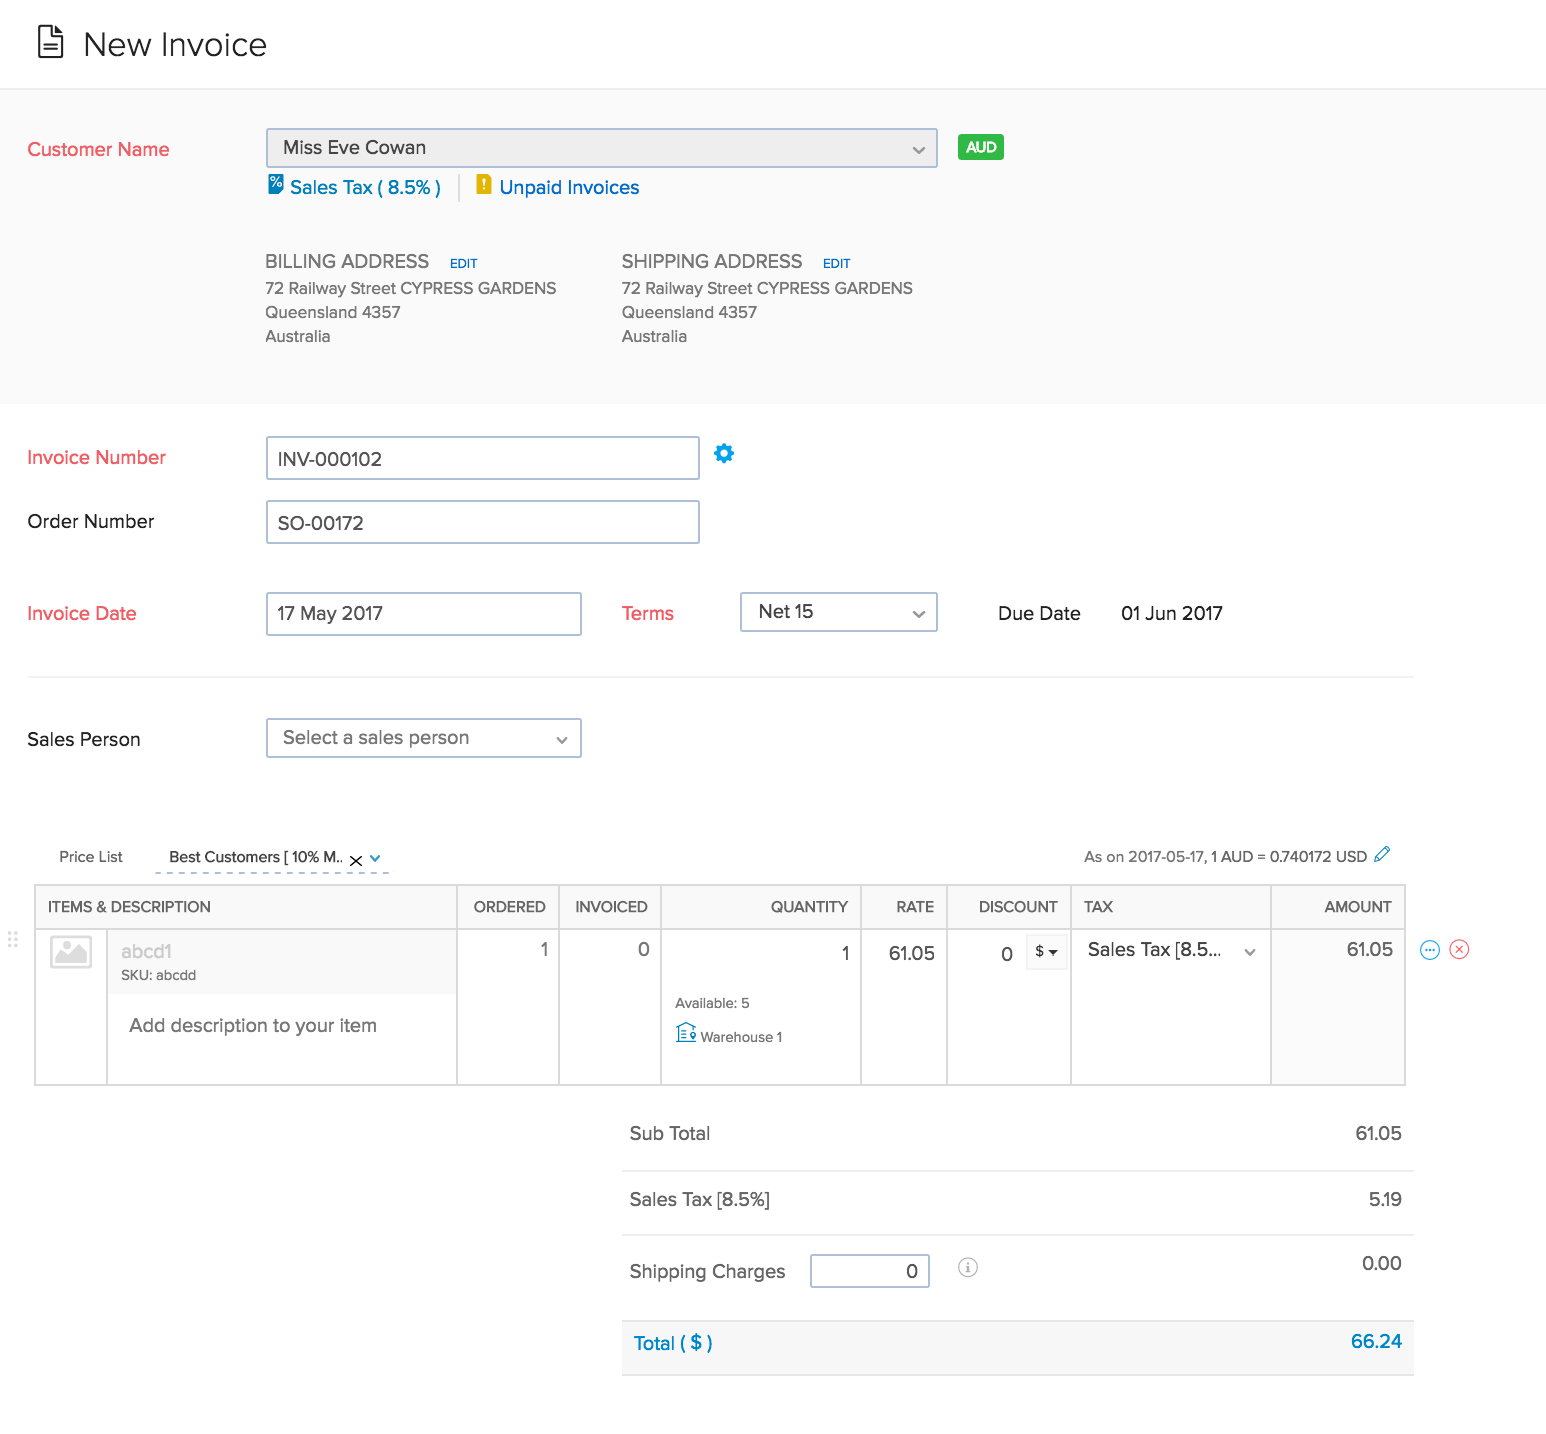 Image of the new invoice page - top half